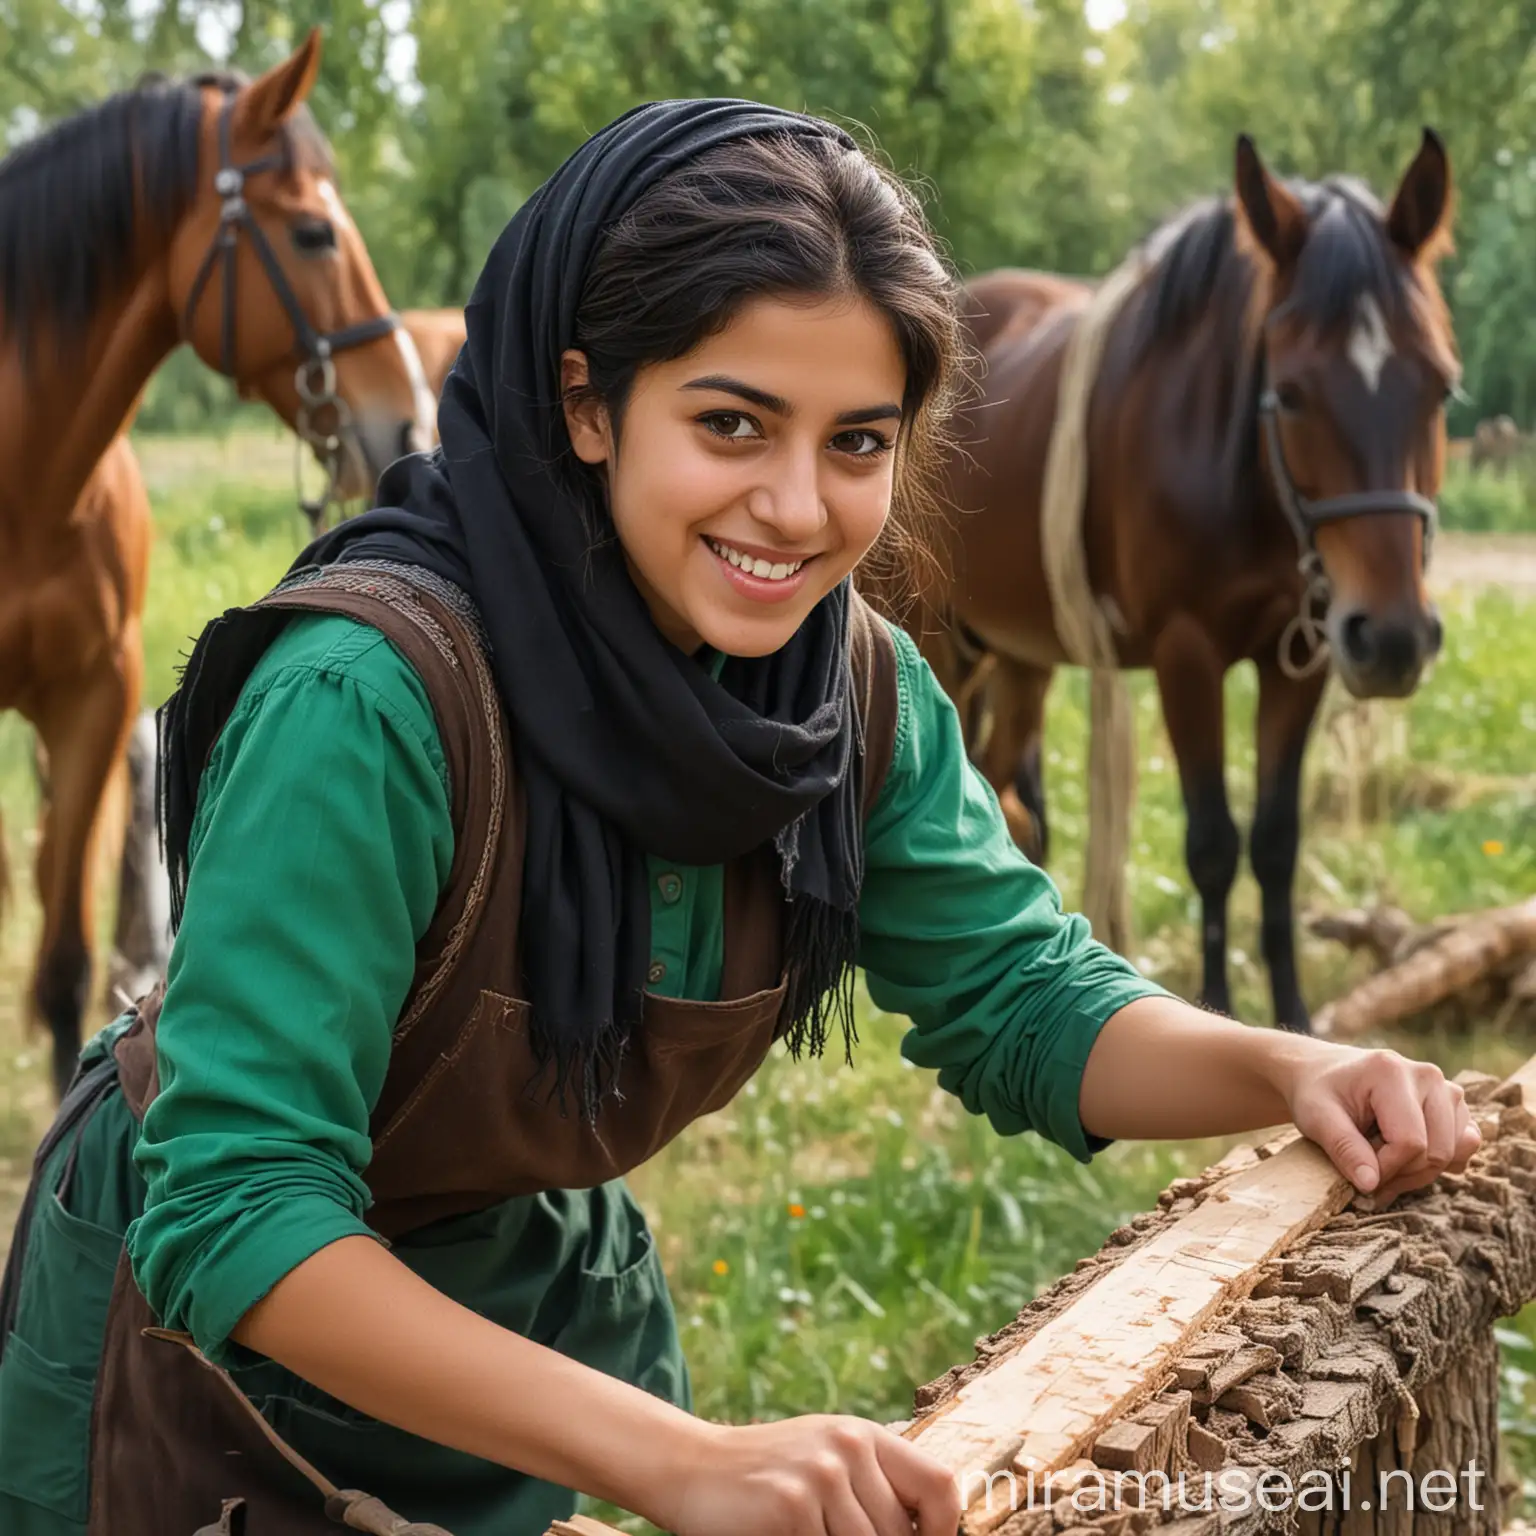 Iranian Carpenter Girl in Nature Cutting Wood with Saw